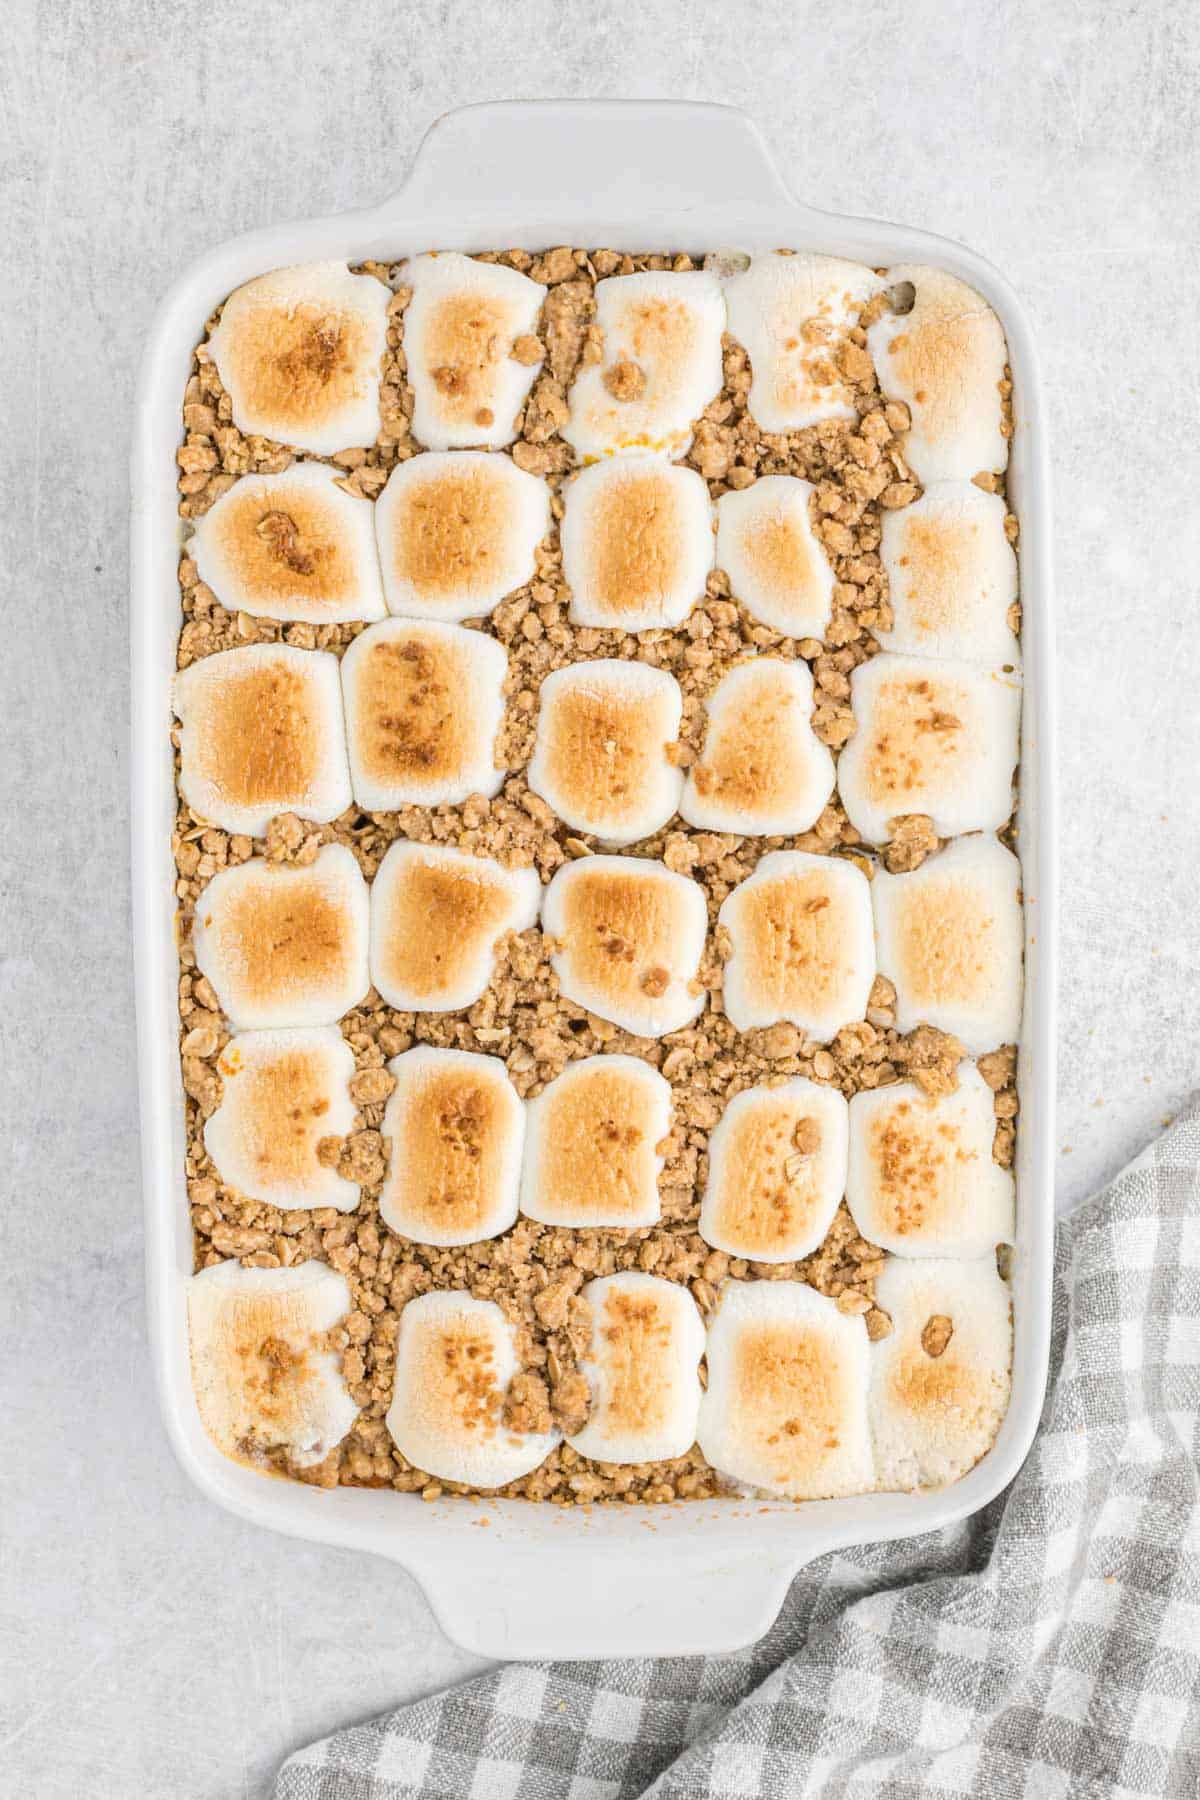 Baked southern sweet potato casserole with marshmallows.